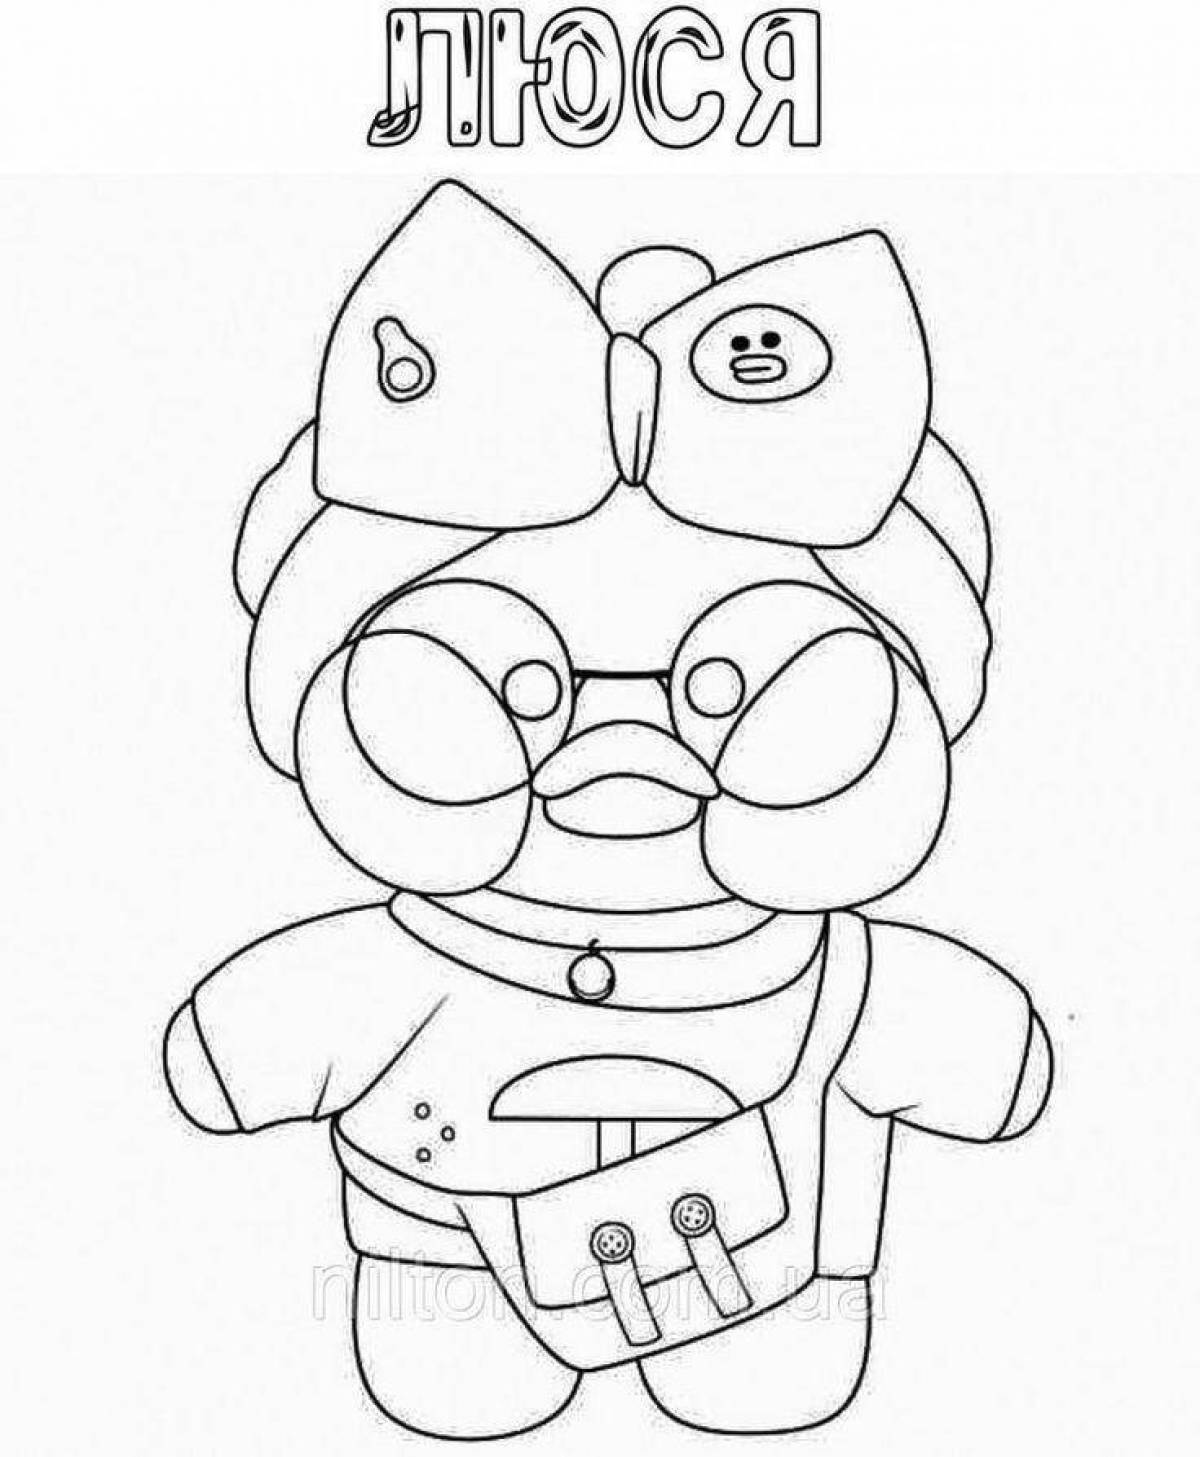 Lalafanfan playful duck coloring page